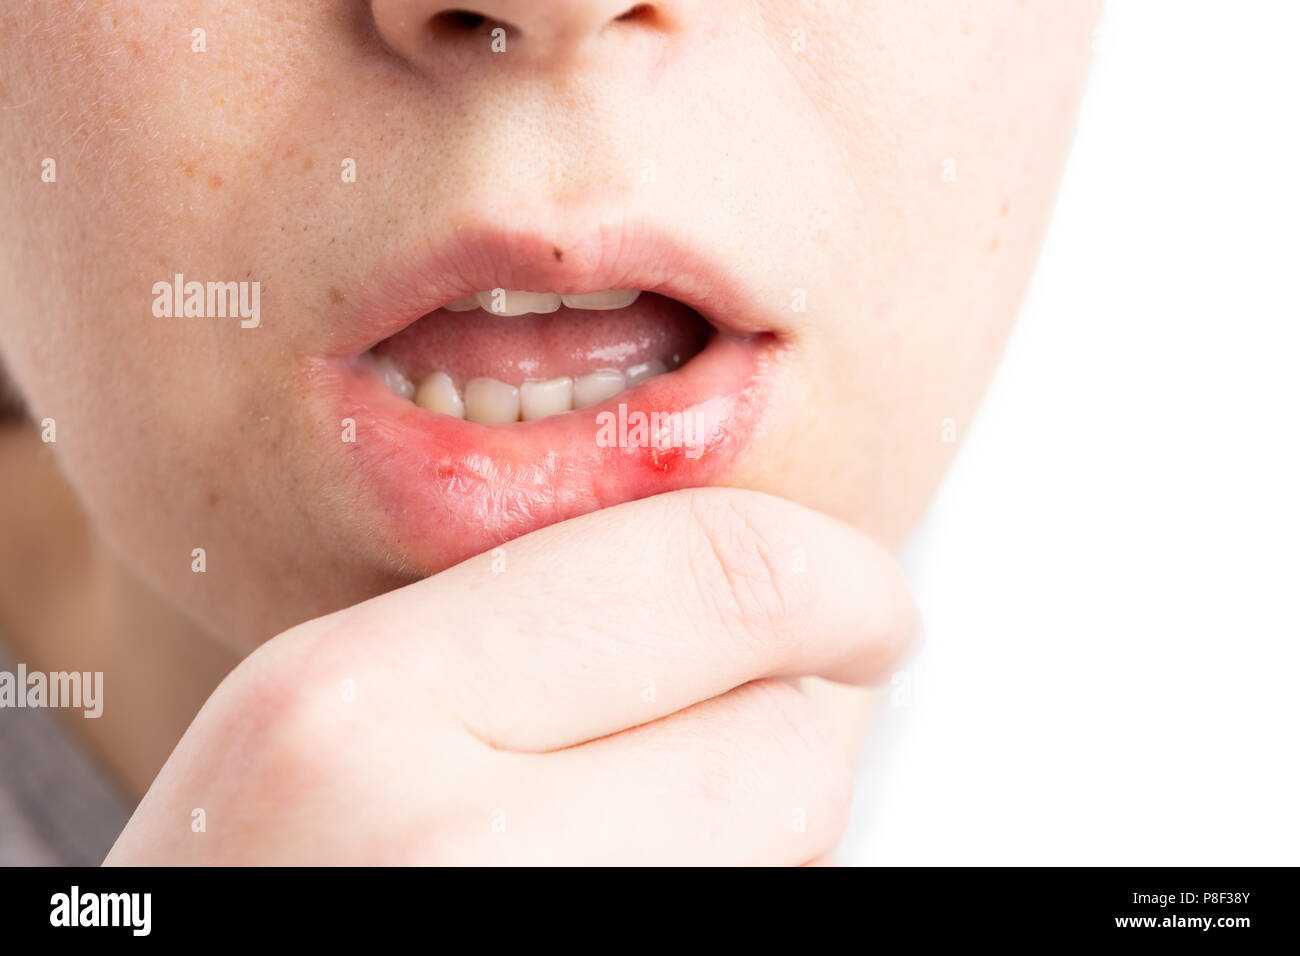 Aphtha on woman lower lip as medical discomfort or female stomatitis concept Stock Photo